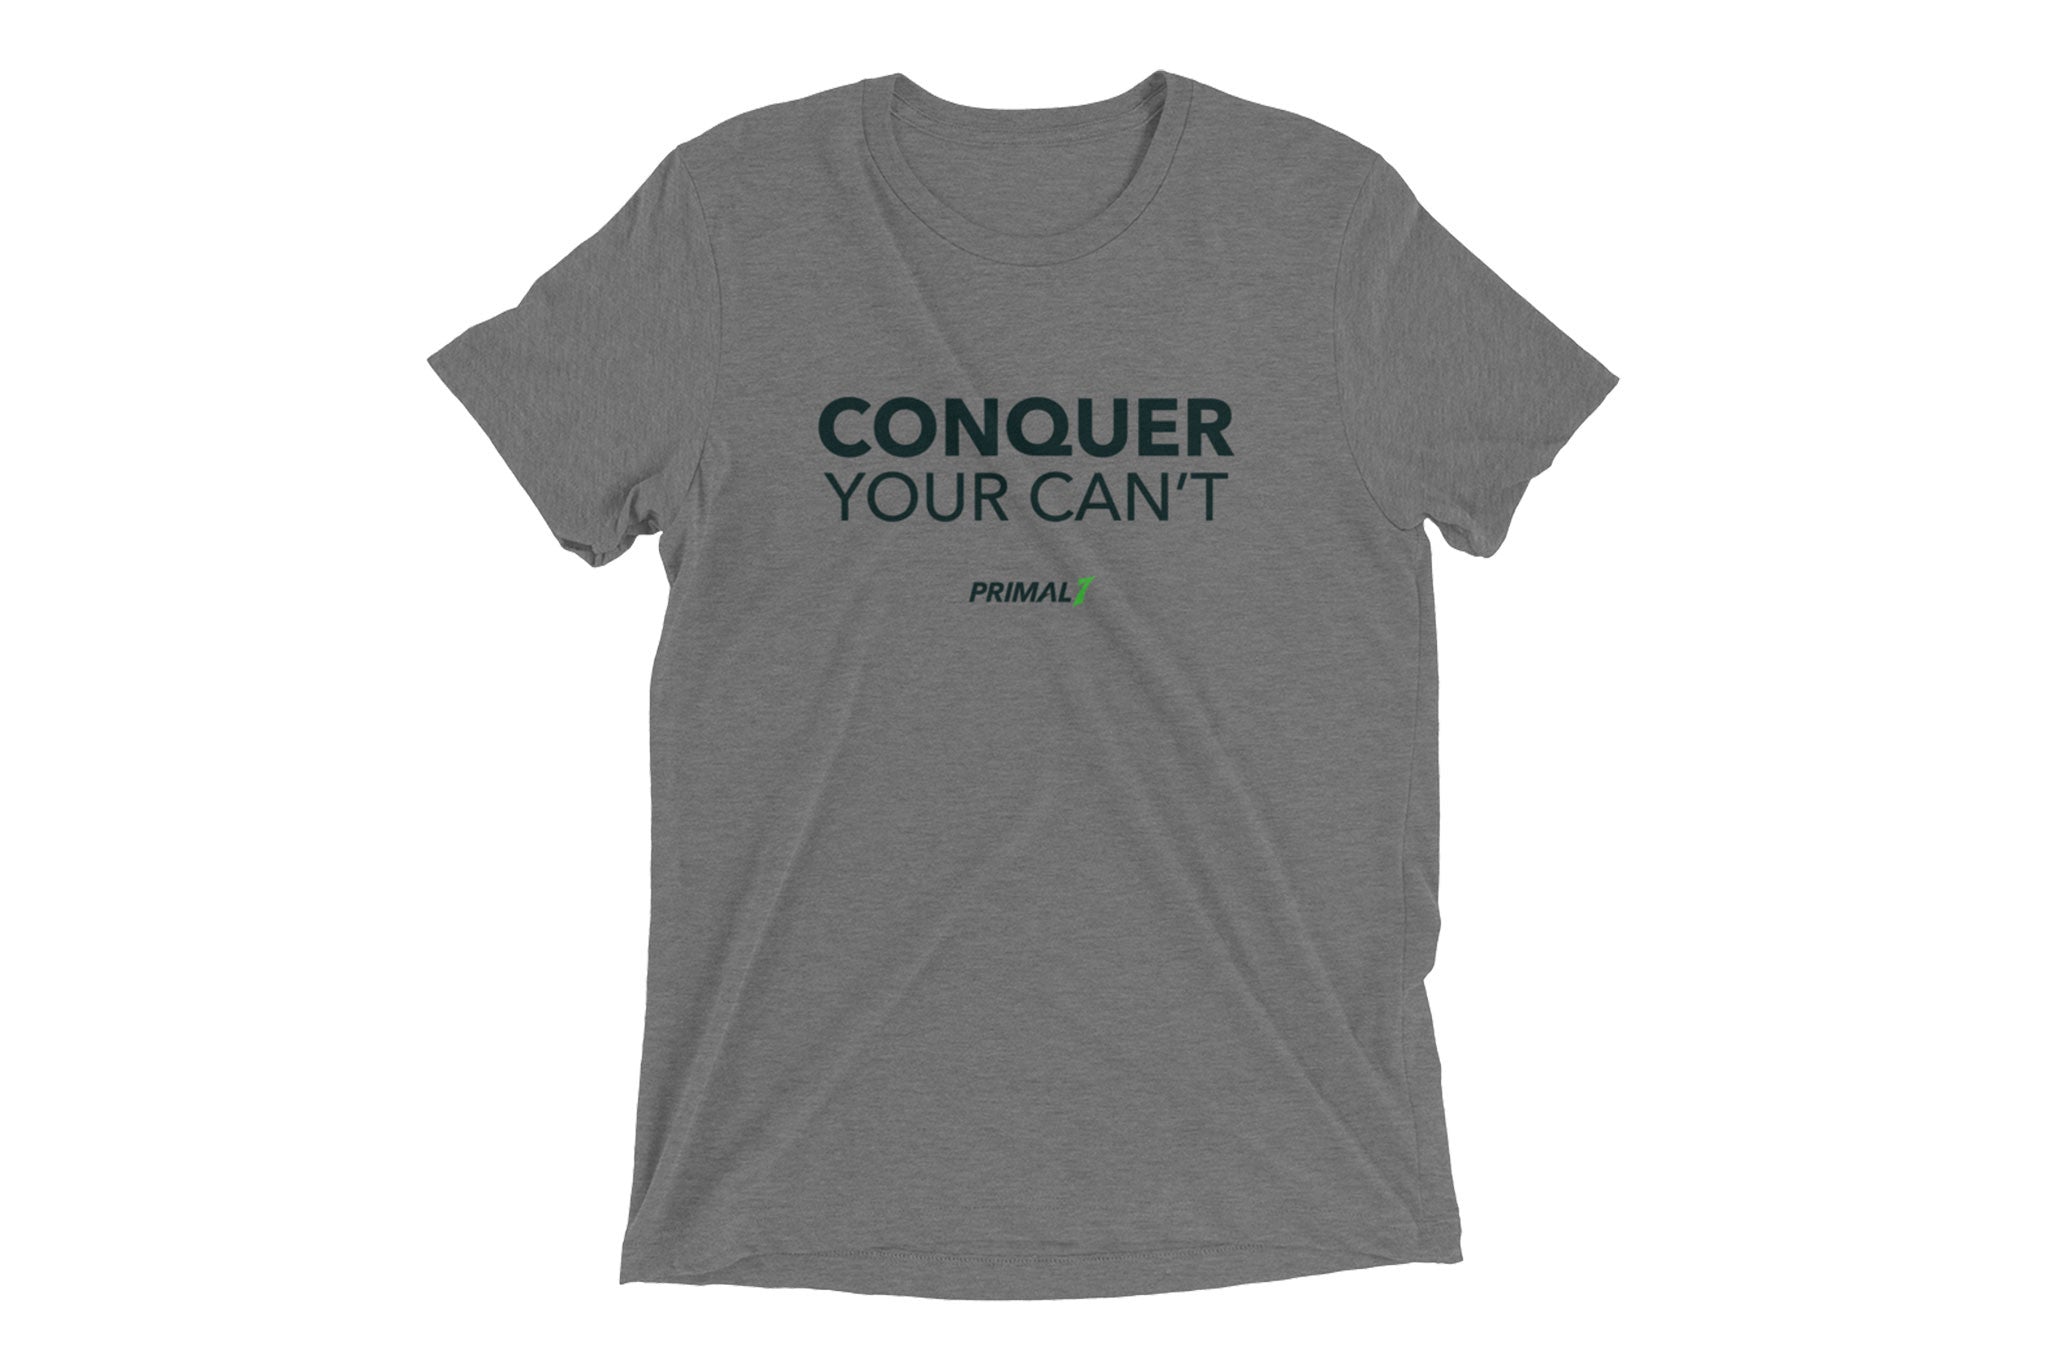 Primal 7 Conquer Your Can't T-Shirt Grey